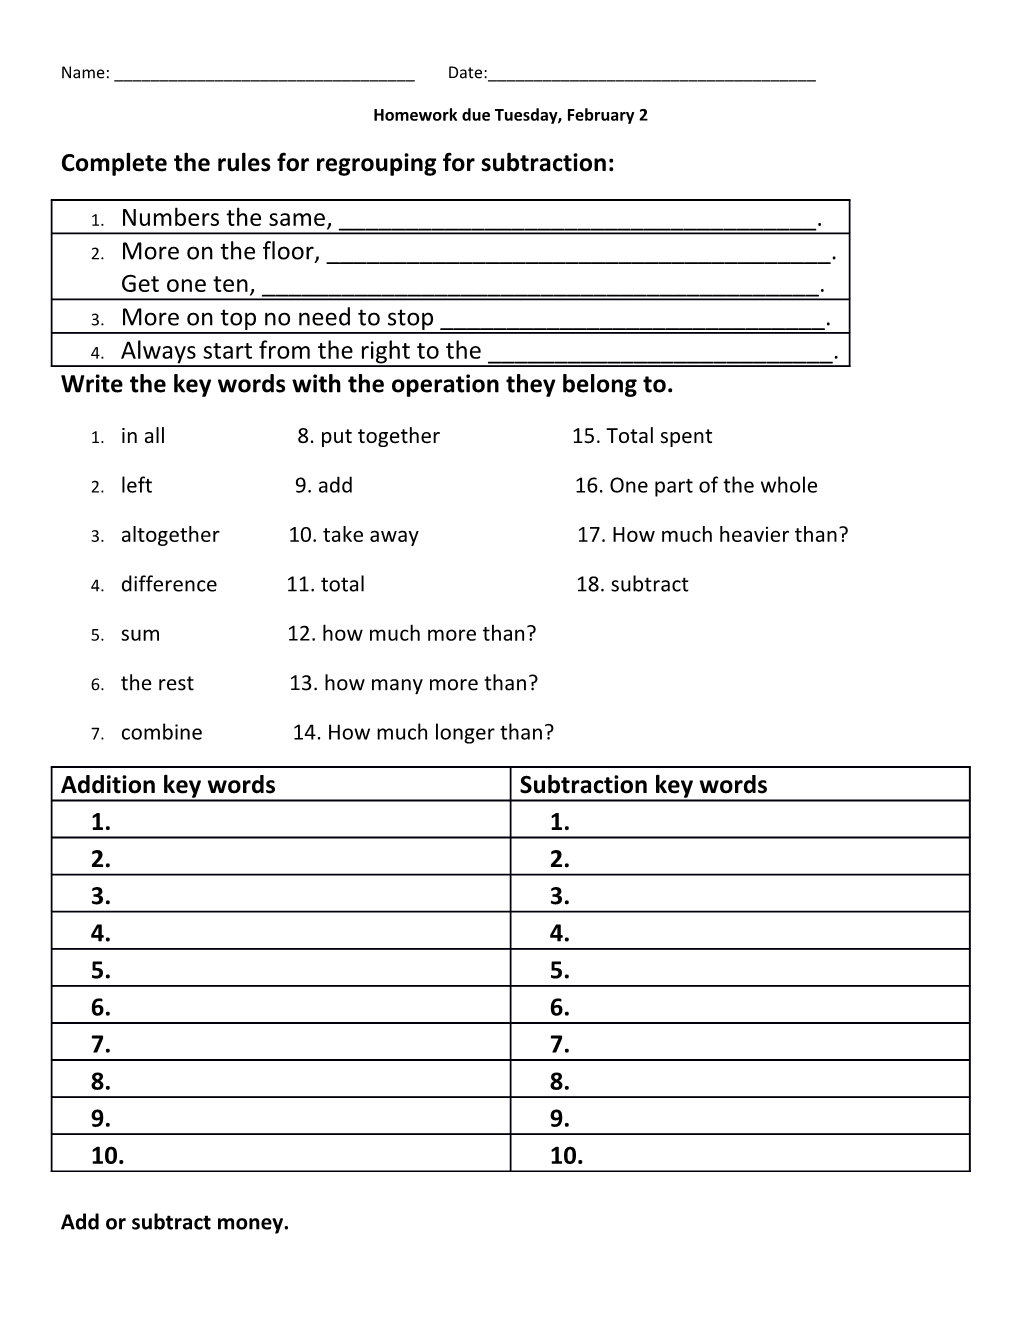 Complete the Rules for Regrouping for Subtraction